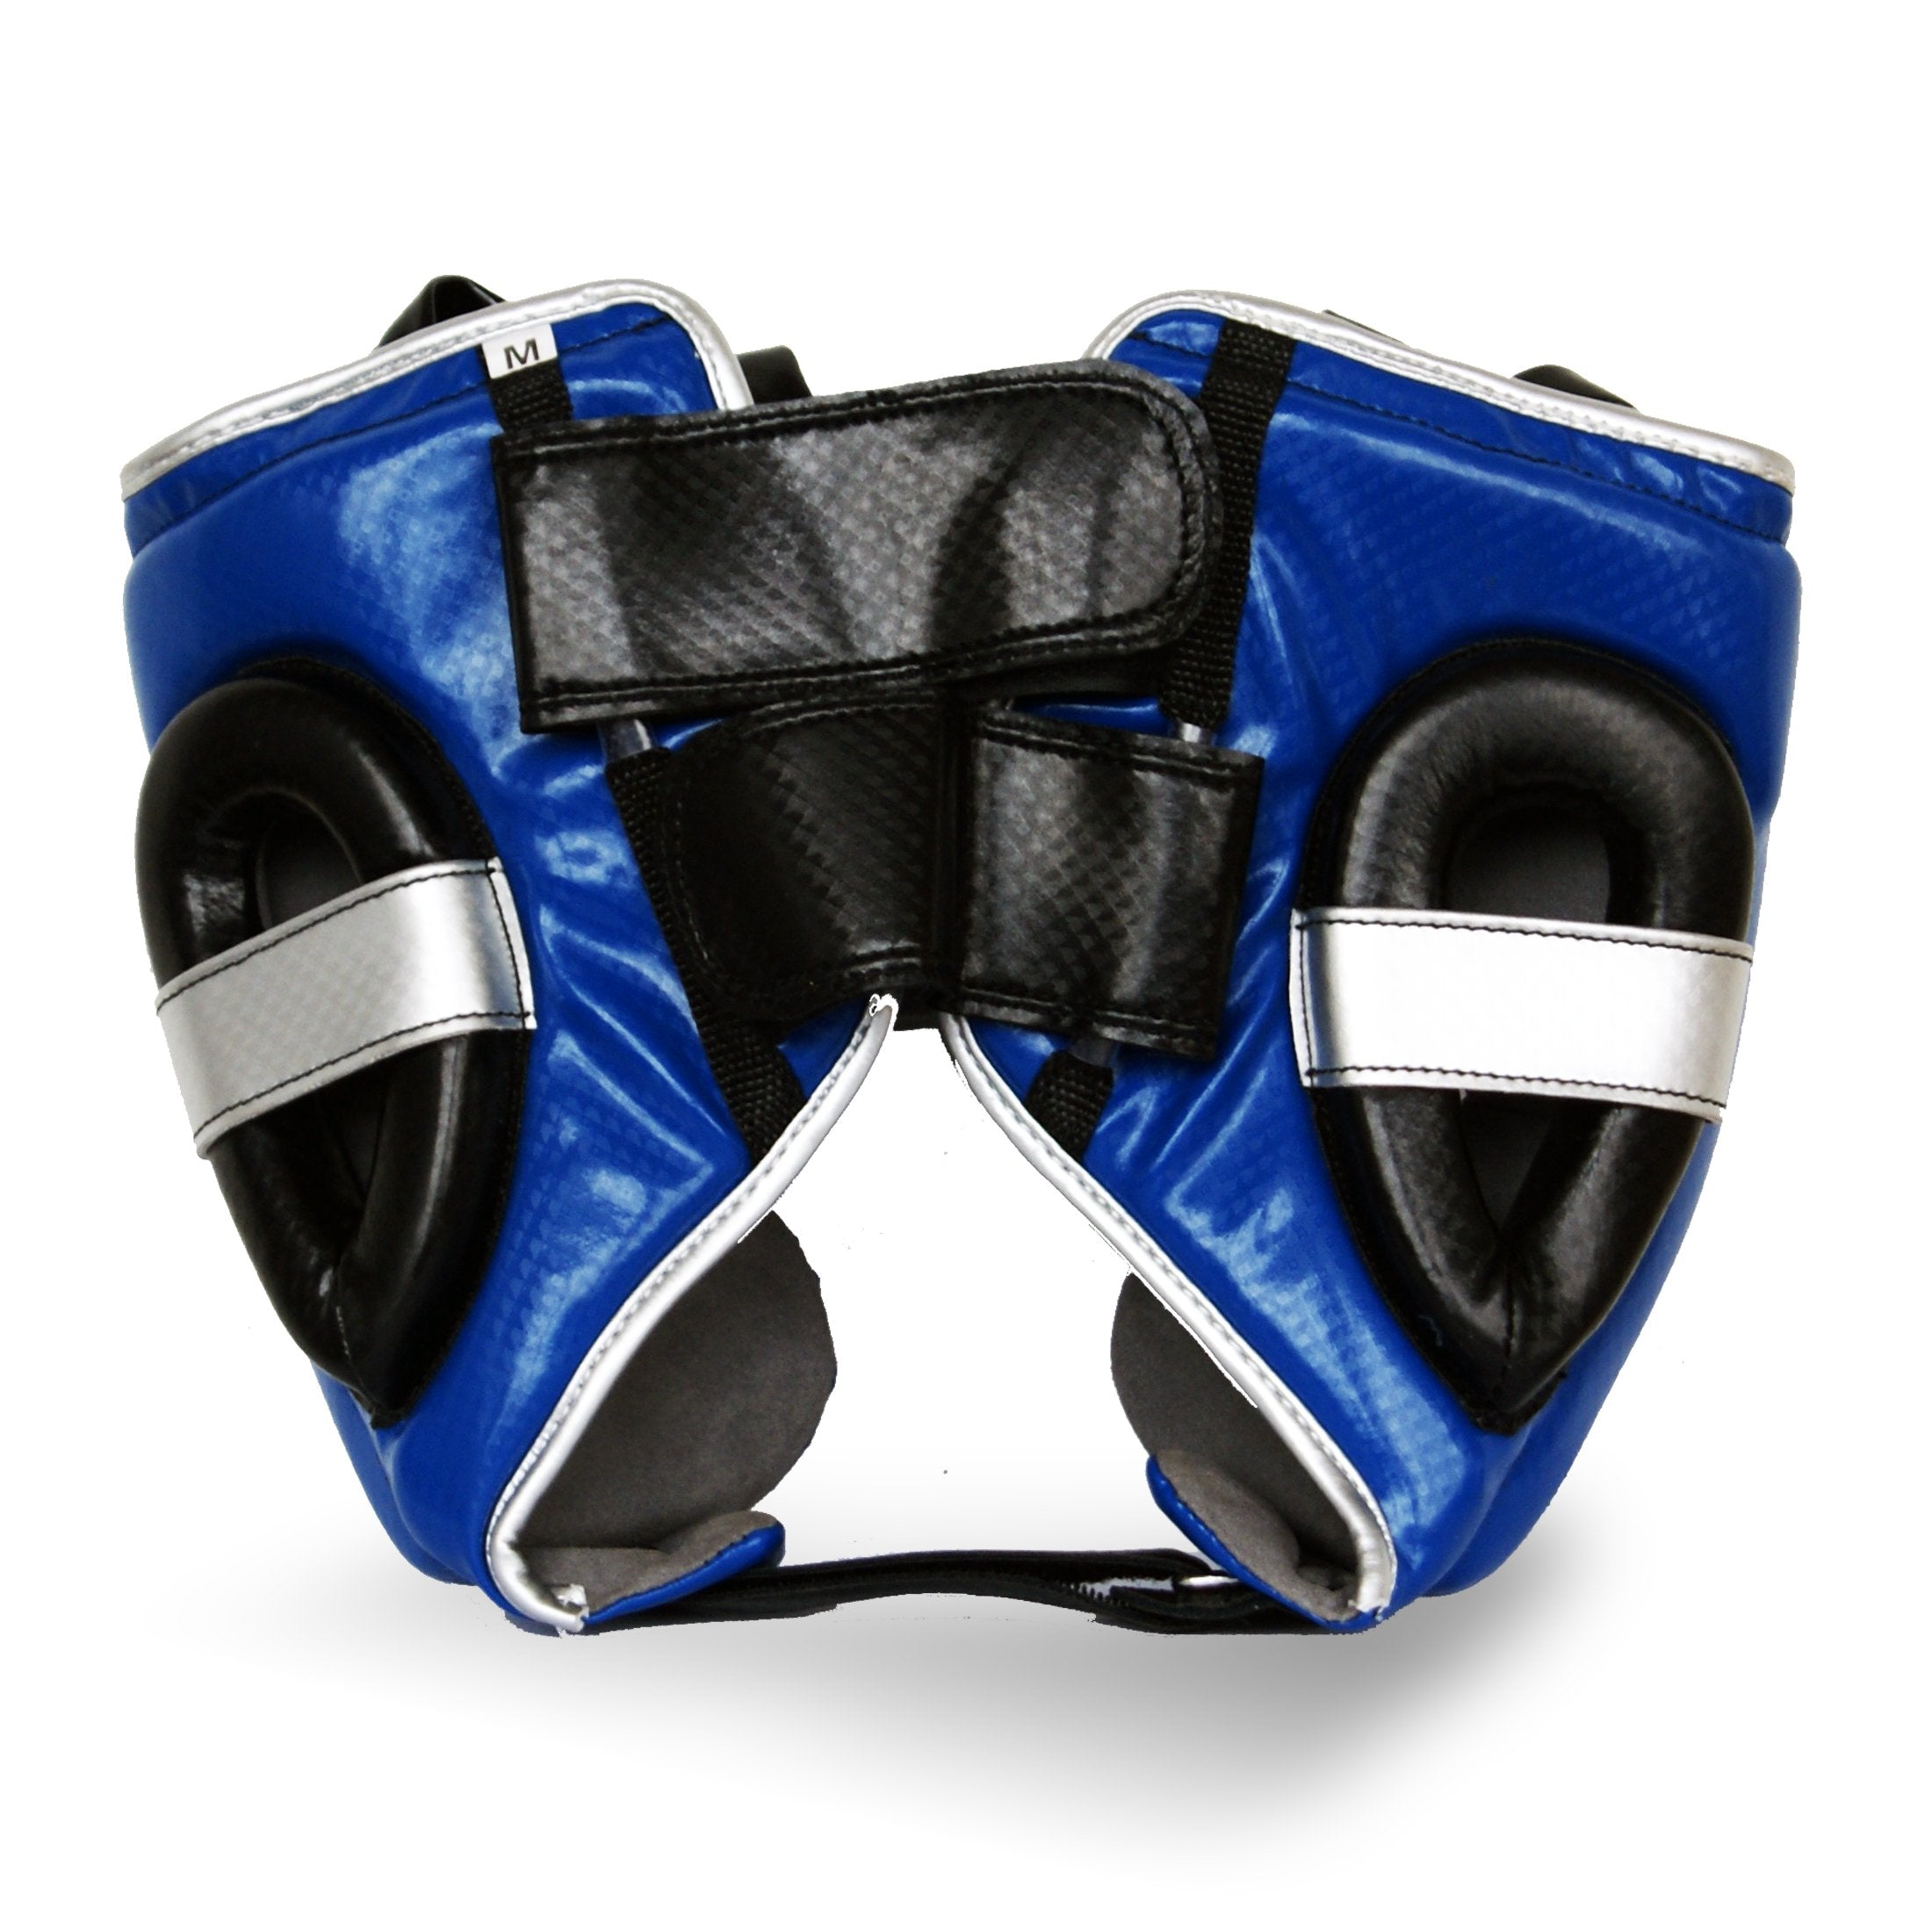 Pro Fitness Head Guard Synthetic Leather Metallic Navy / Black / Silver